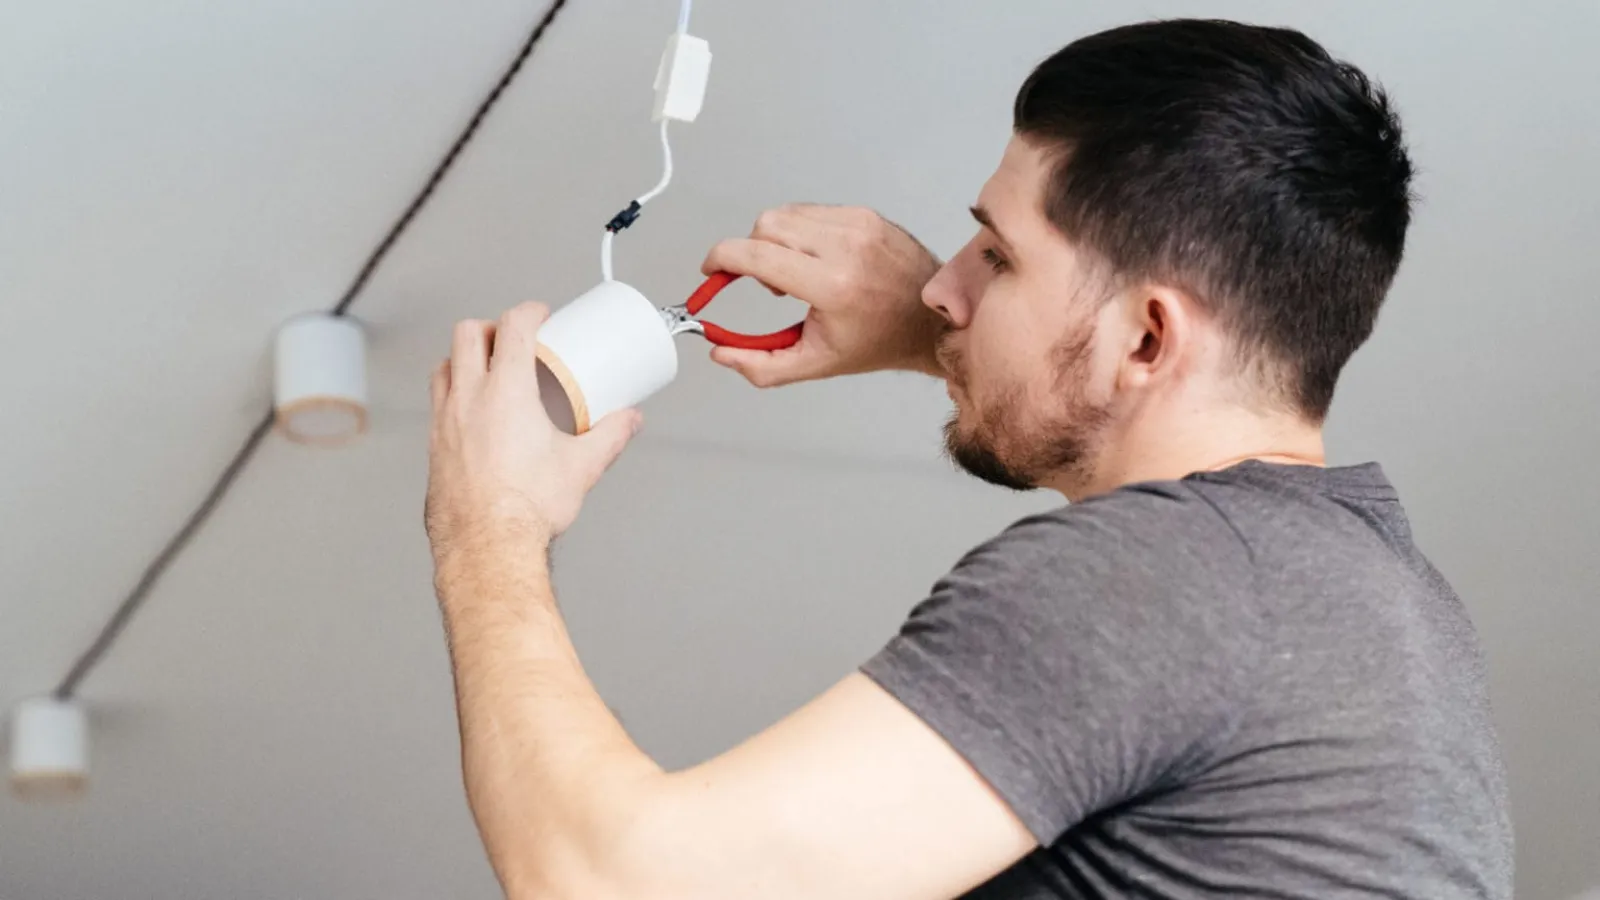 Light Fixture Installation: When You Need a Pro